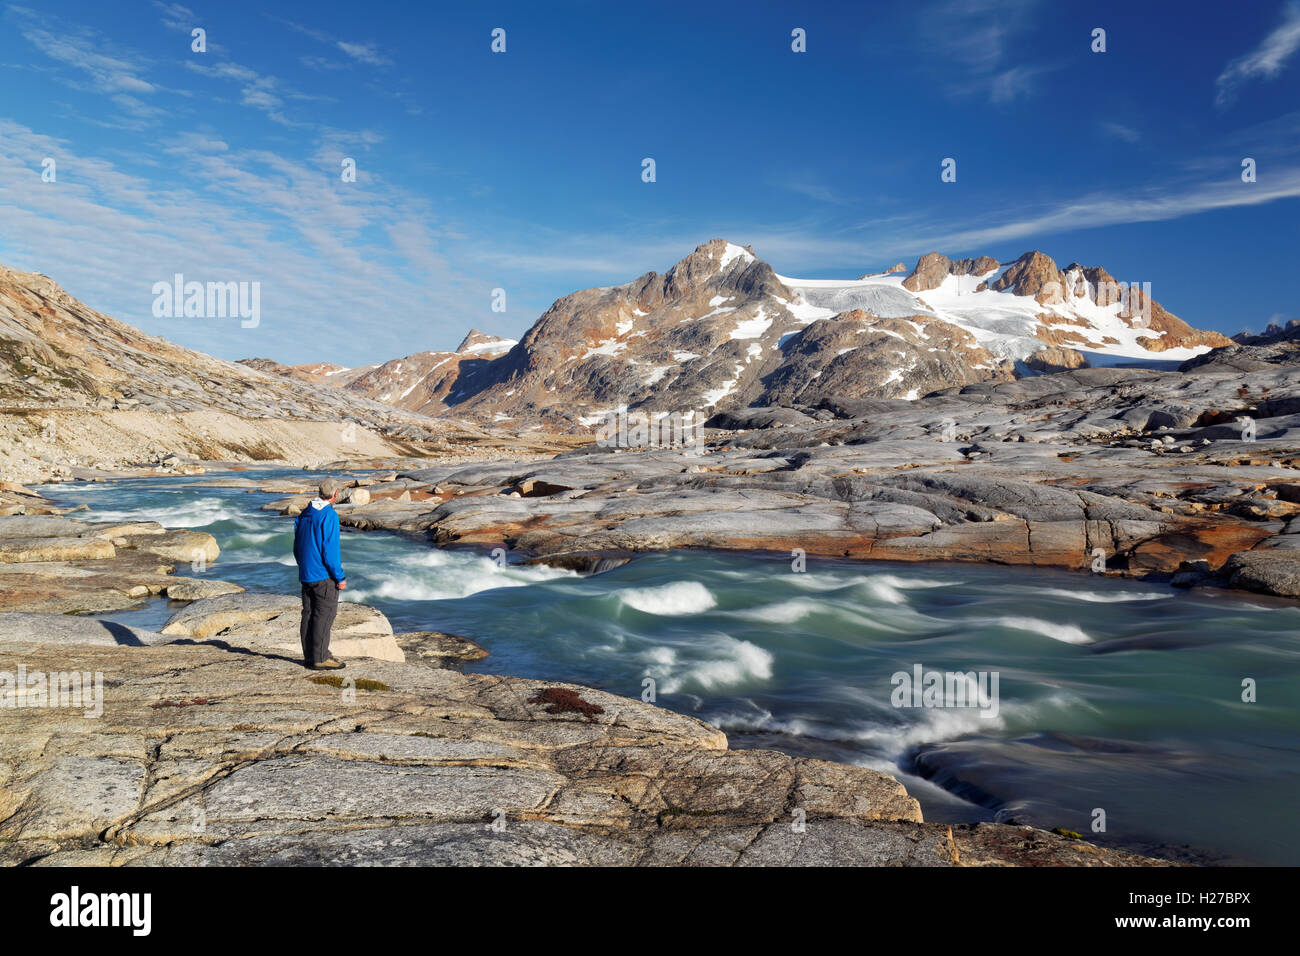 Hiker looking over glacial melt river and mountains, Sammileq Fjord, Ammassalik Island, East Greenland Stock Photo